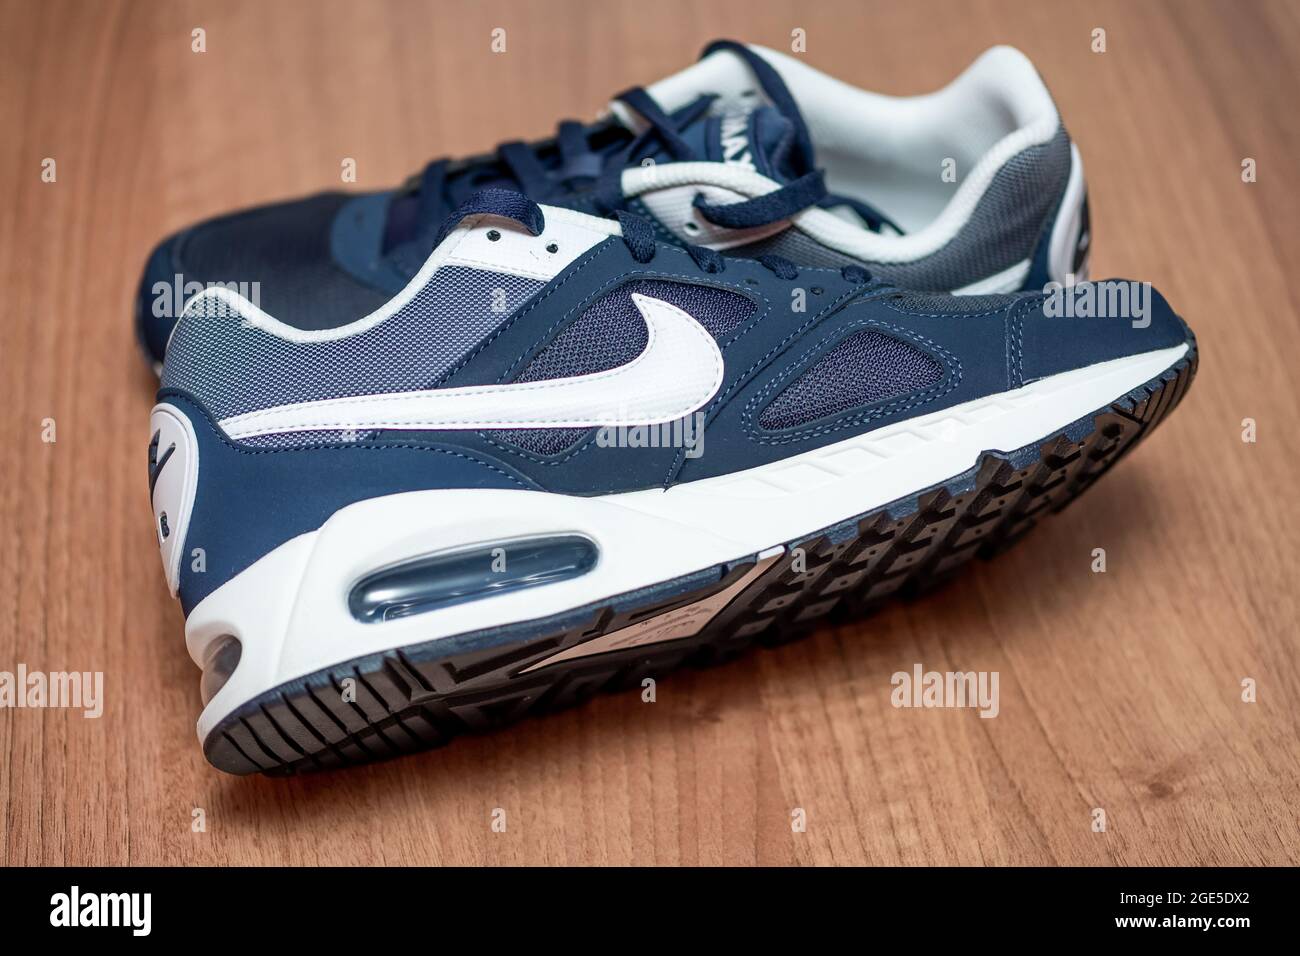 Nike Air Max Trainers High Resolution Stock Photography and Images - Alamy